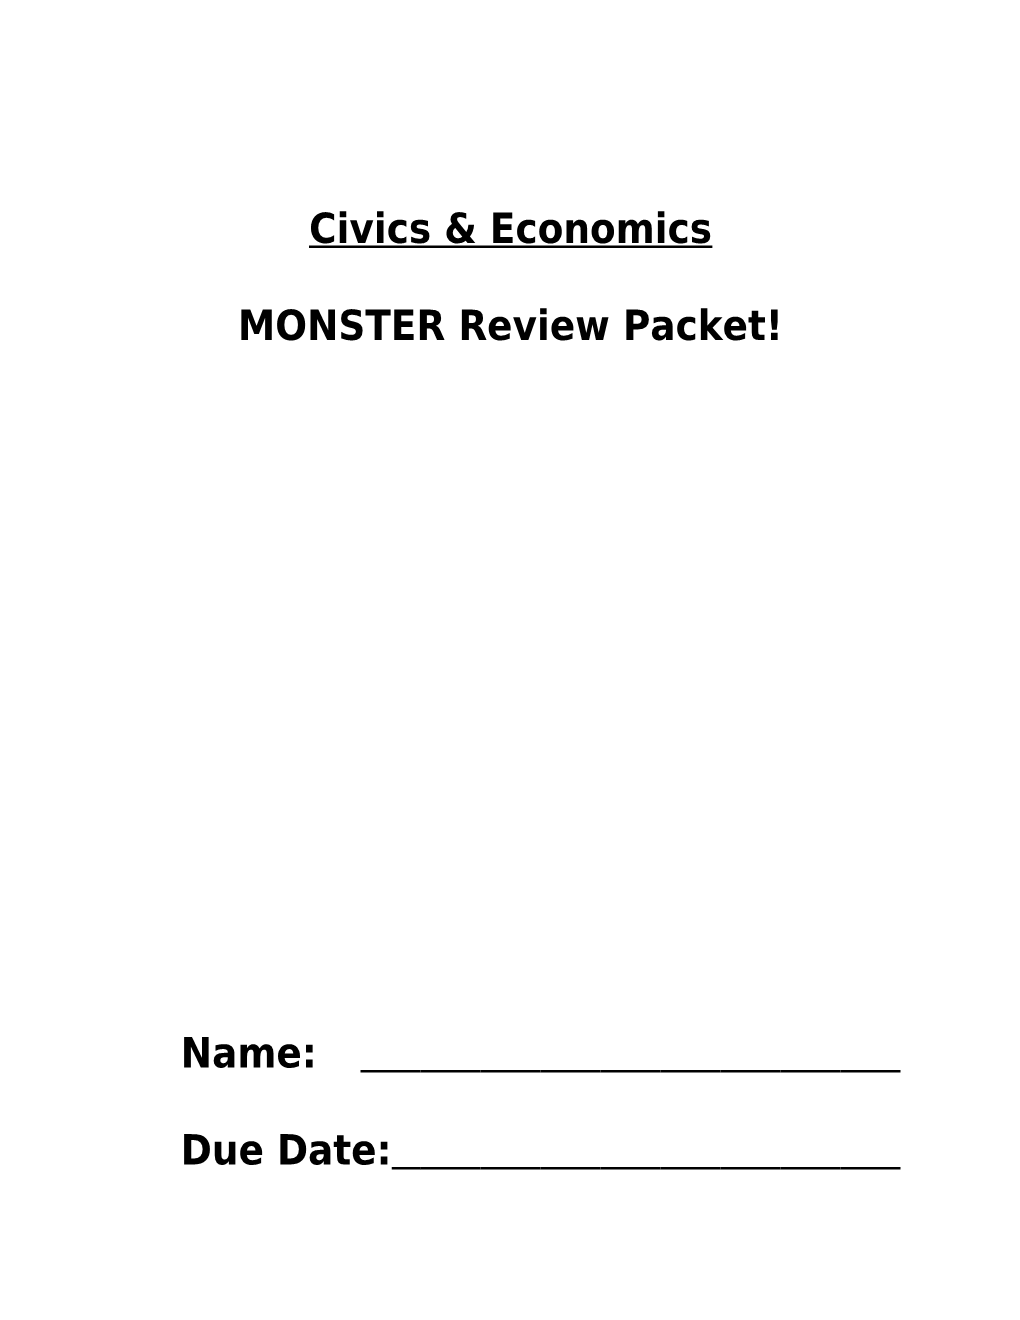 GOAL 1 Colonial America MONSTER REVIEW!